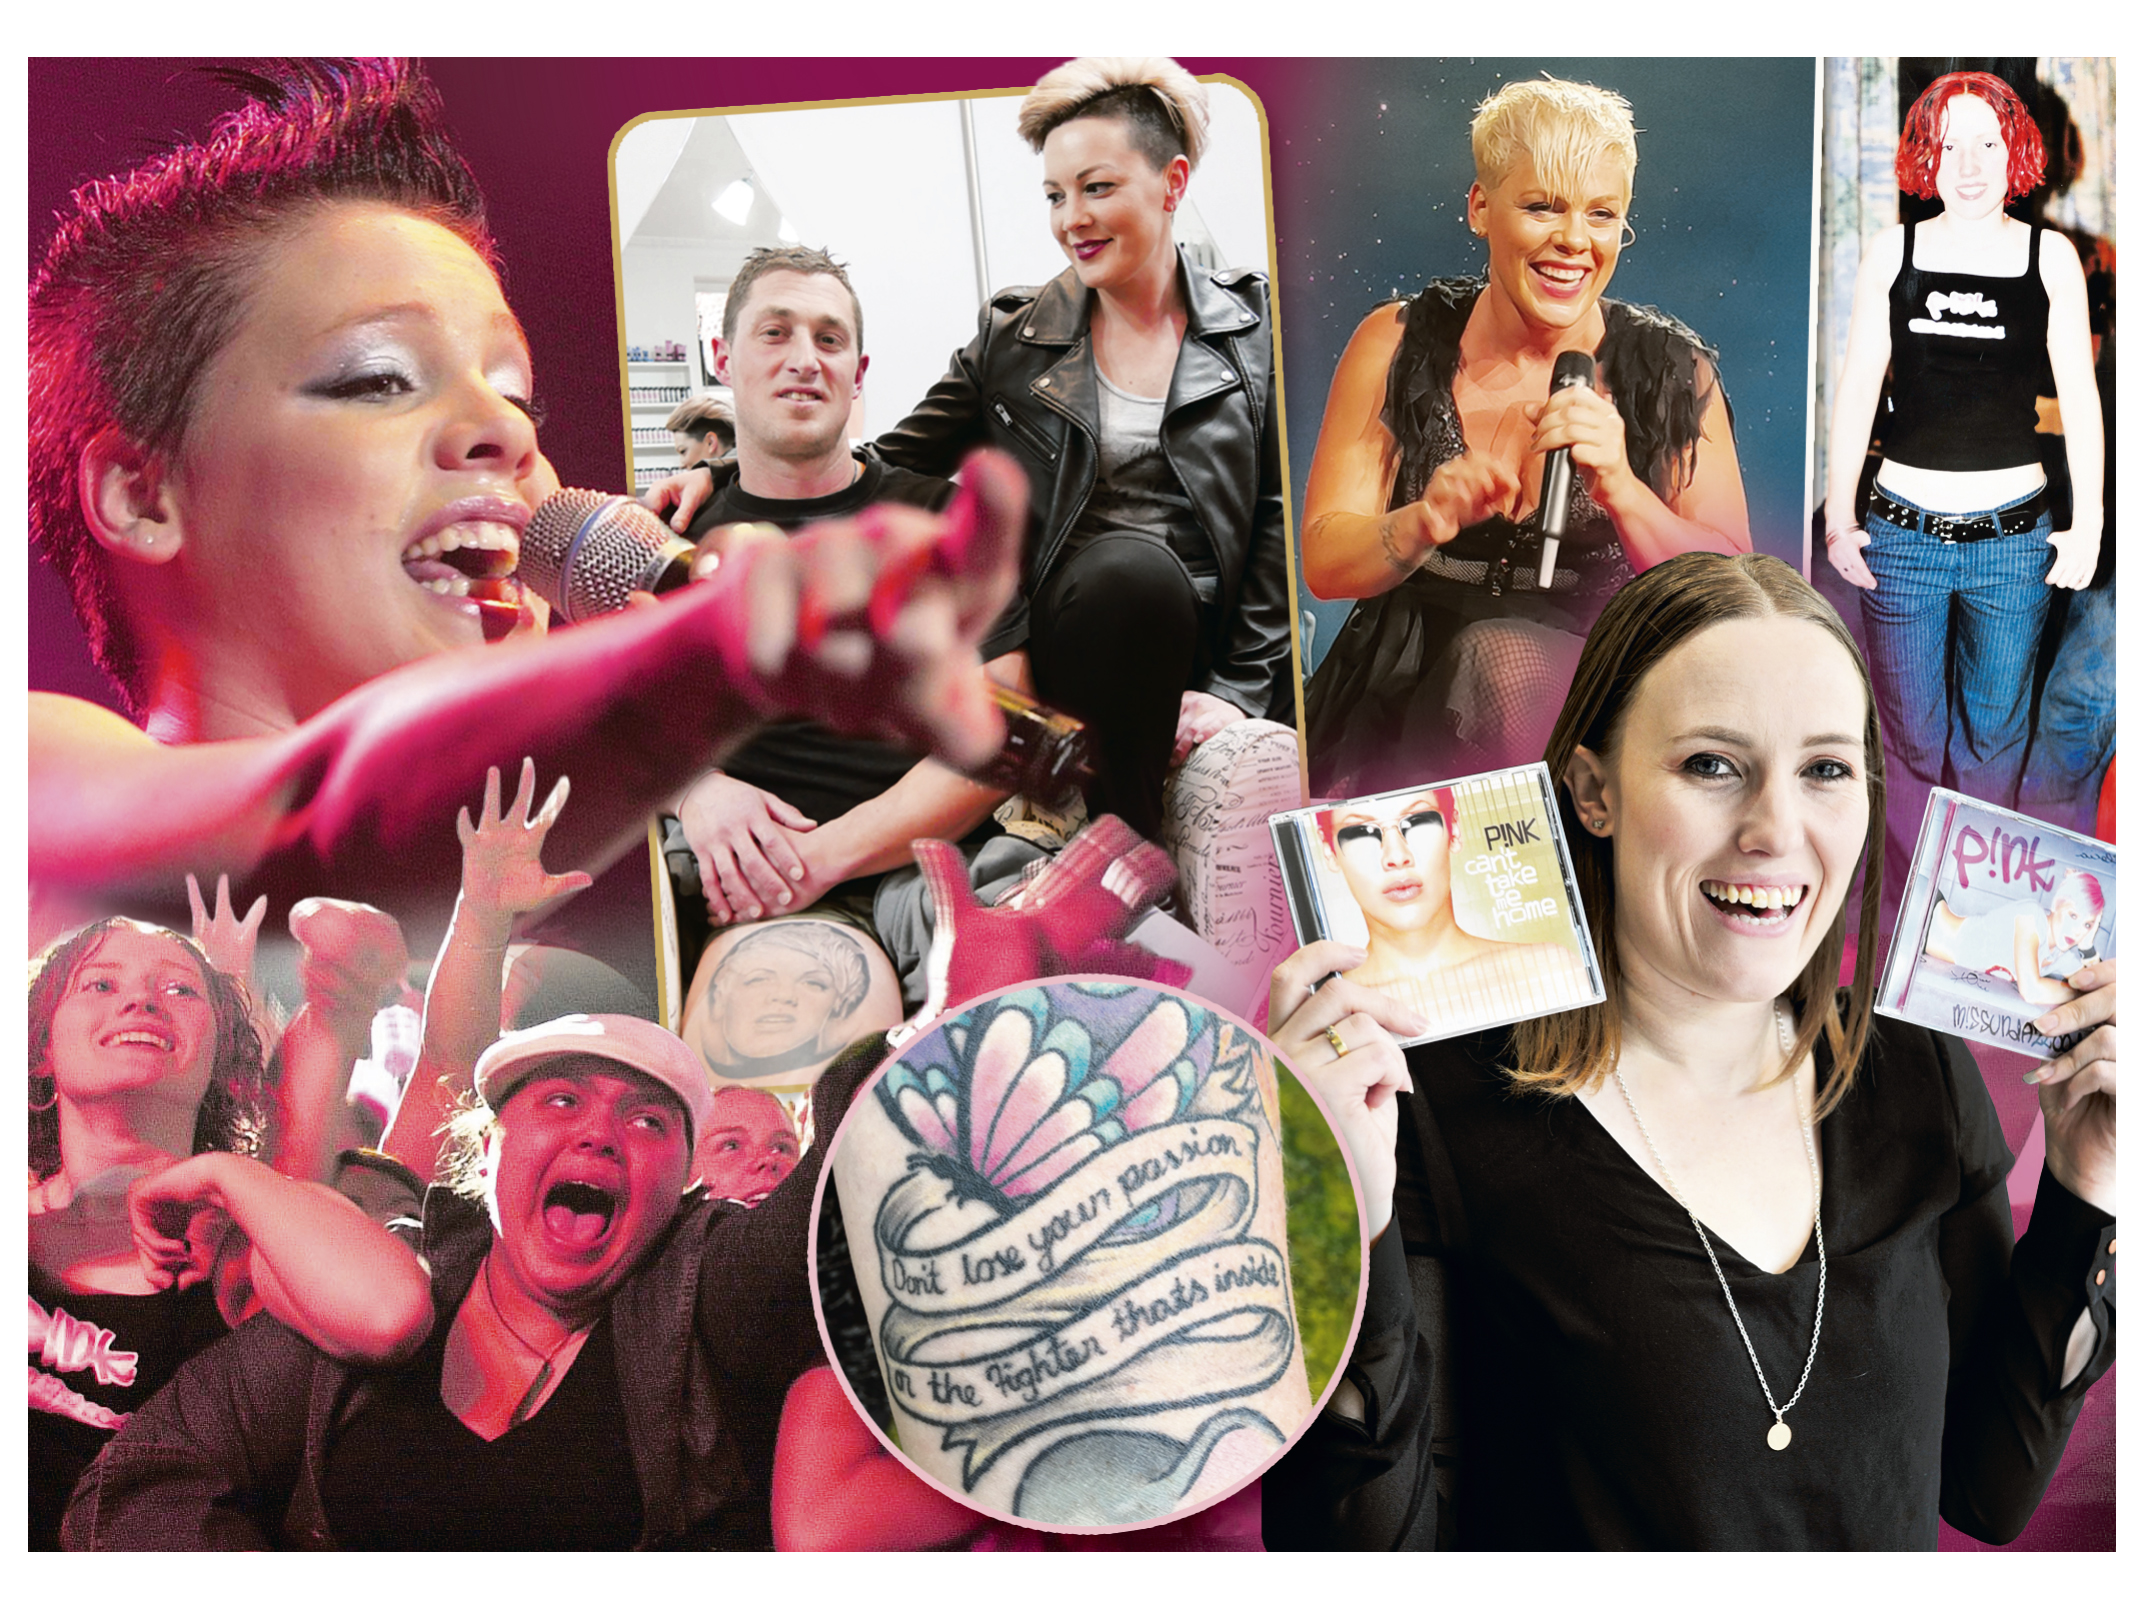 P Nk Porn - Pink's party | Otago Daily Times Online News